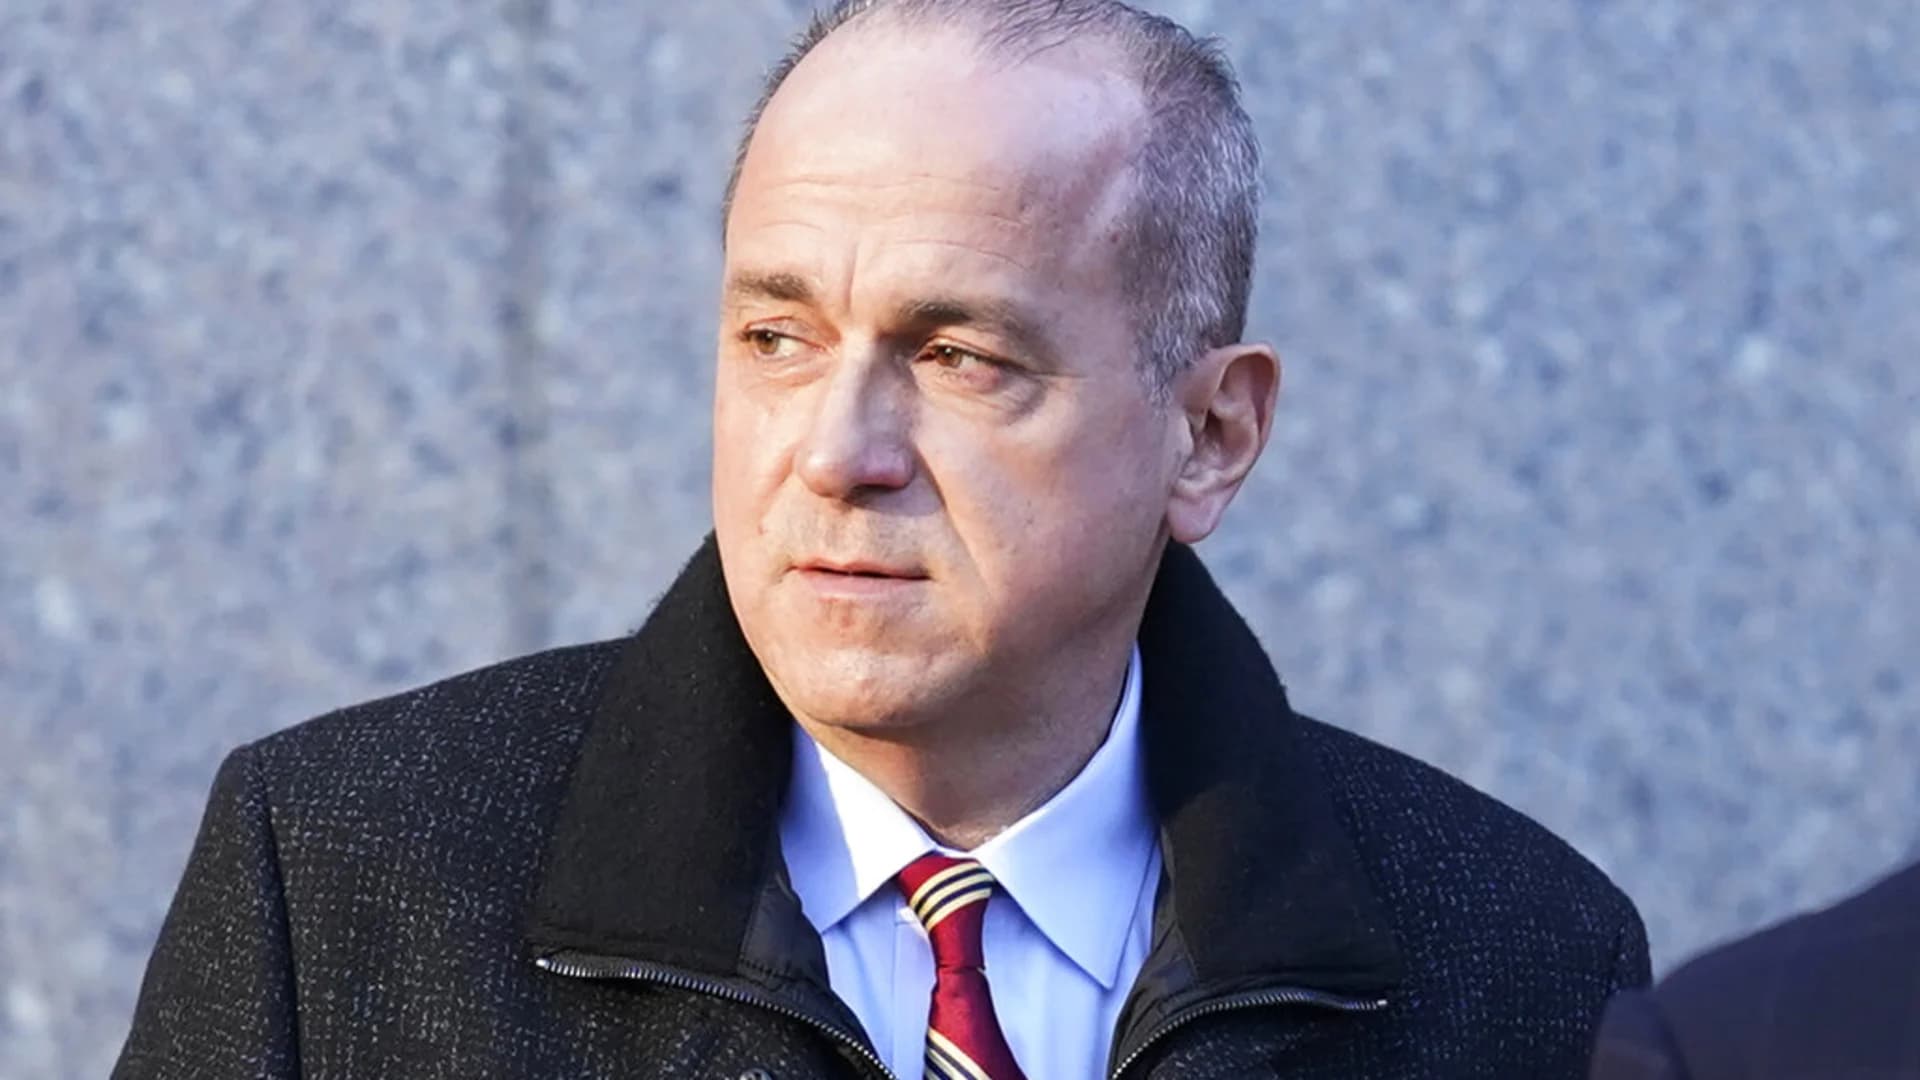 Ex-NYPD sergeants union president pleads guilty to defrauding union and its members